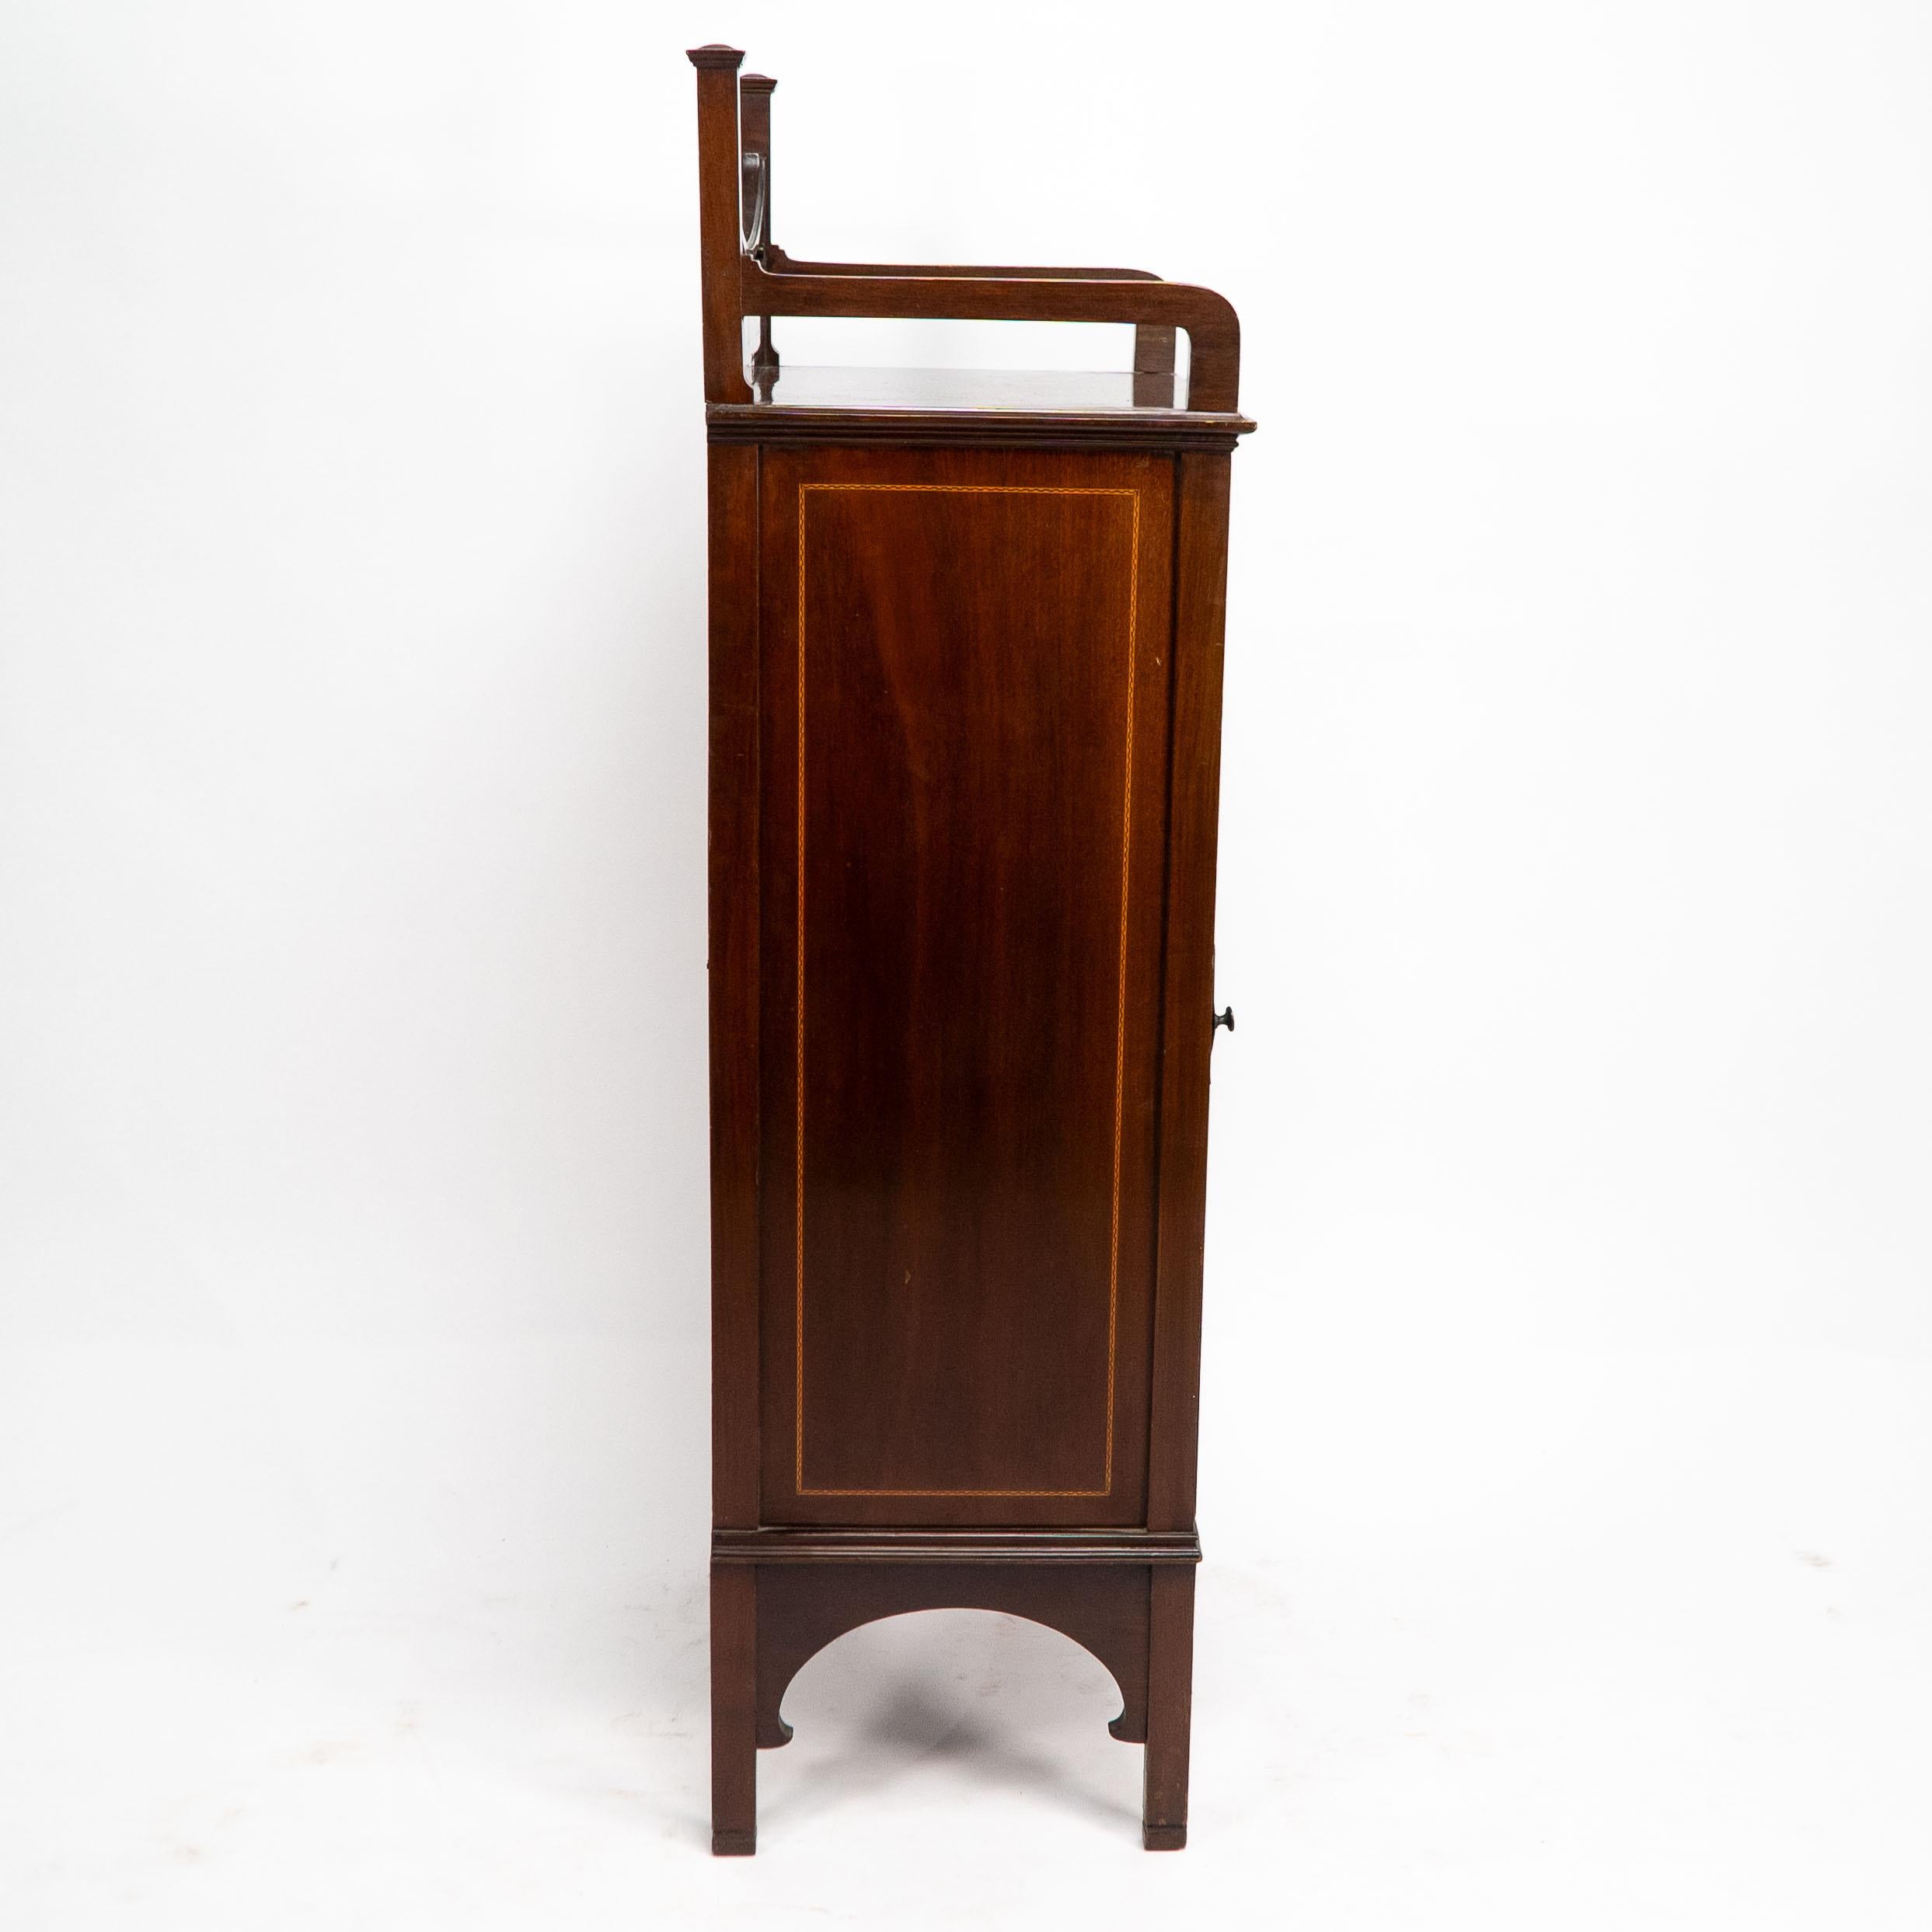 Arts and Crafts A Petite Arts & Crafts Mahogany Display Cabinet in the Anglo-Japanese Style. For Sale